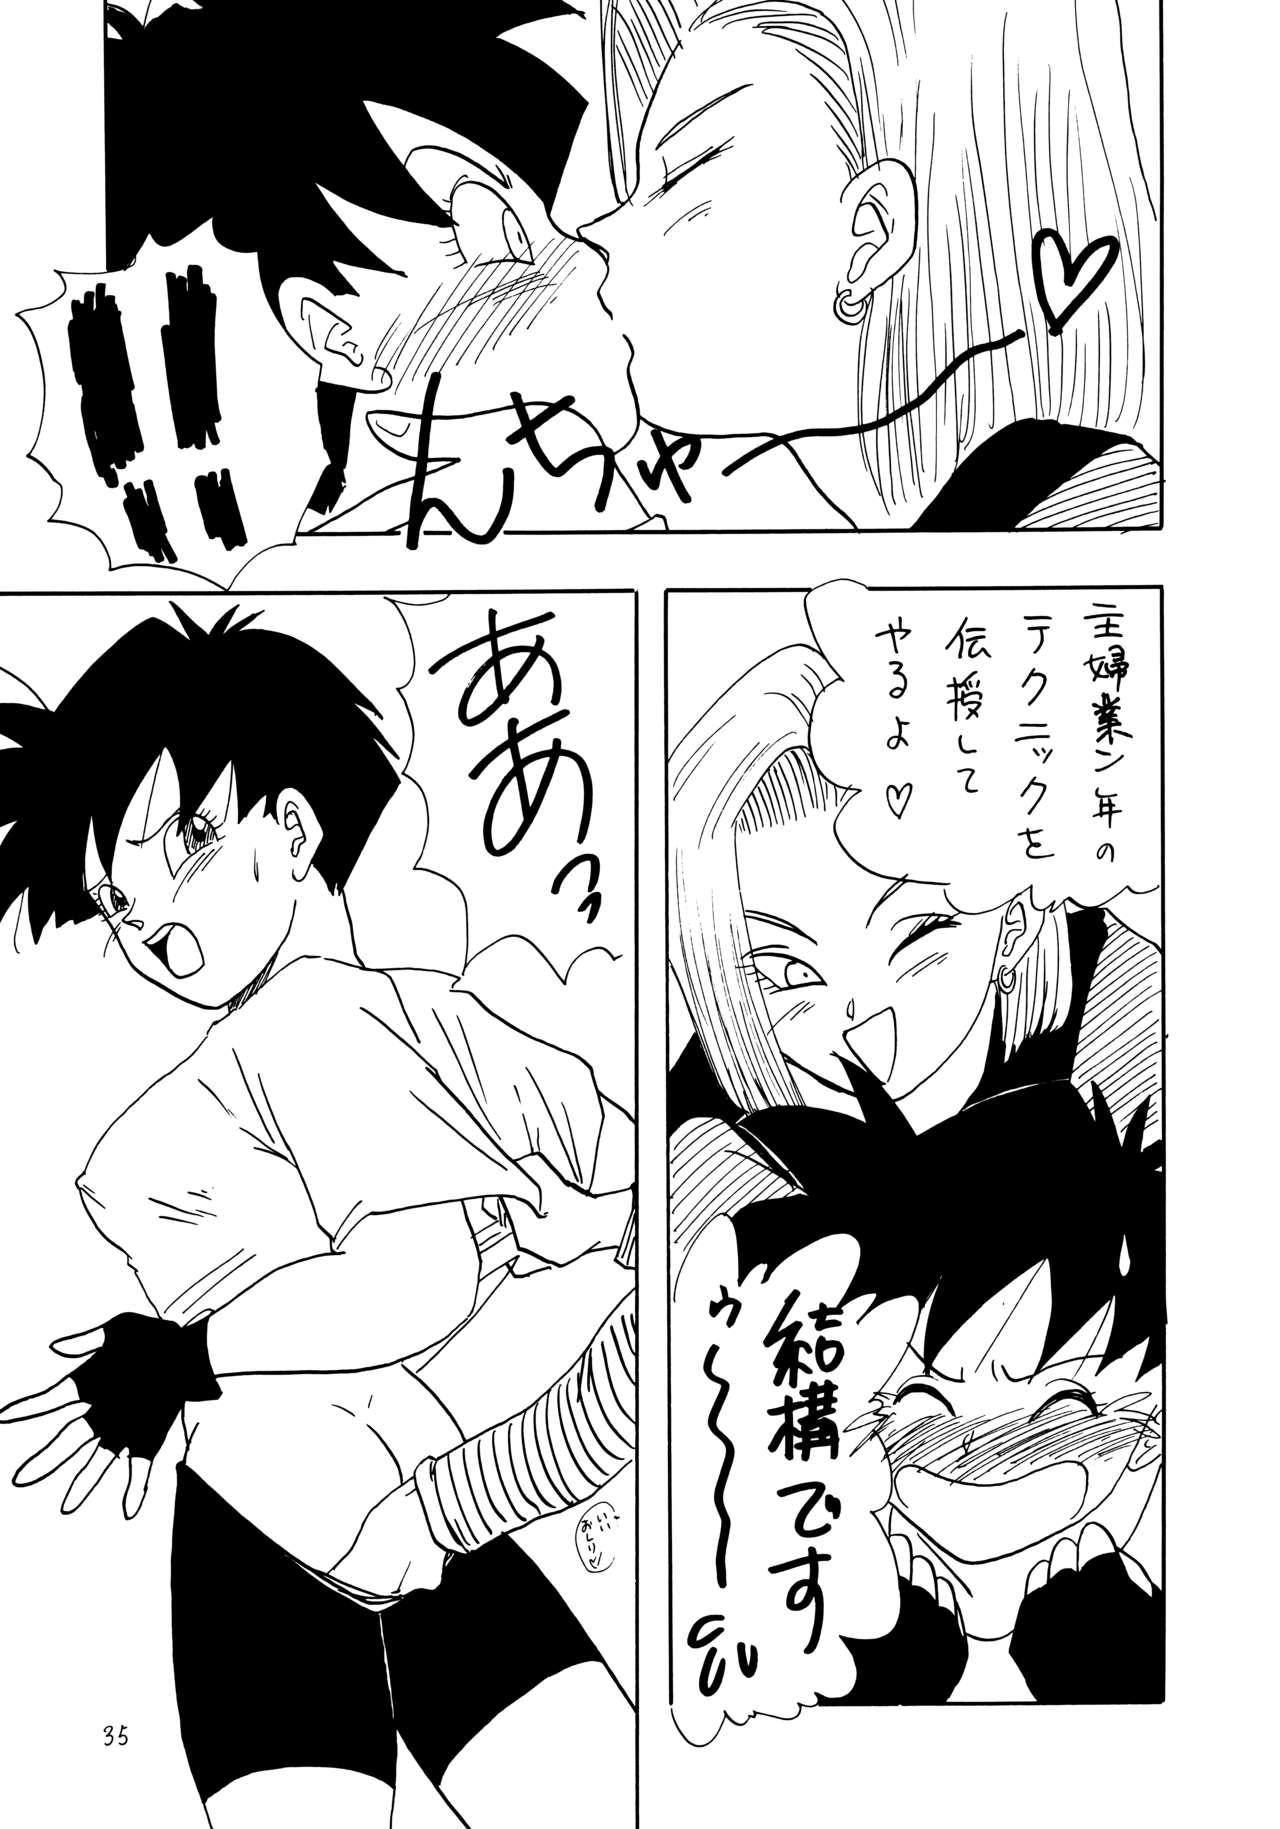 Y Page 35 Of 51 dragon ball z uncensored hentai, Y Page 35 Of 51 dragon bal...